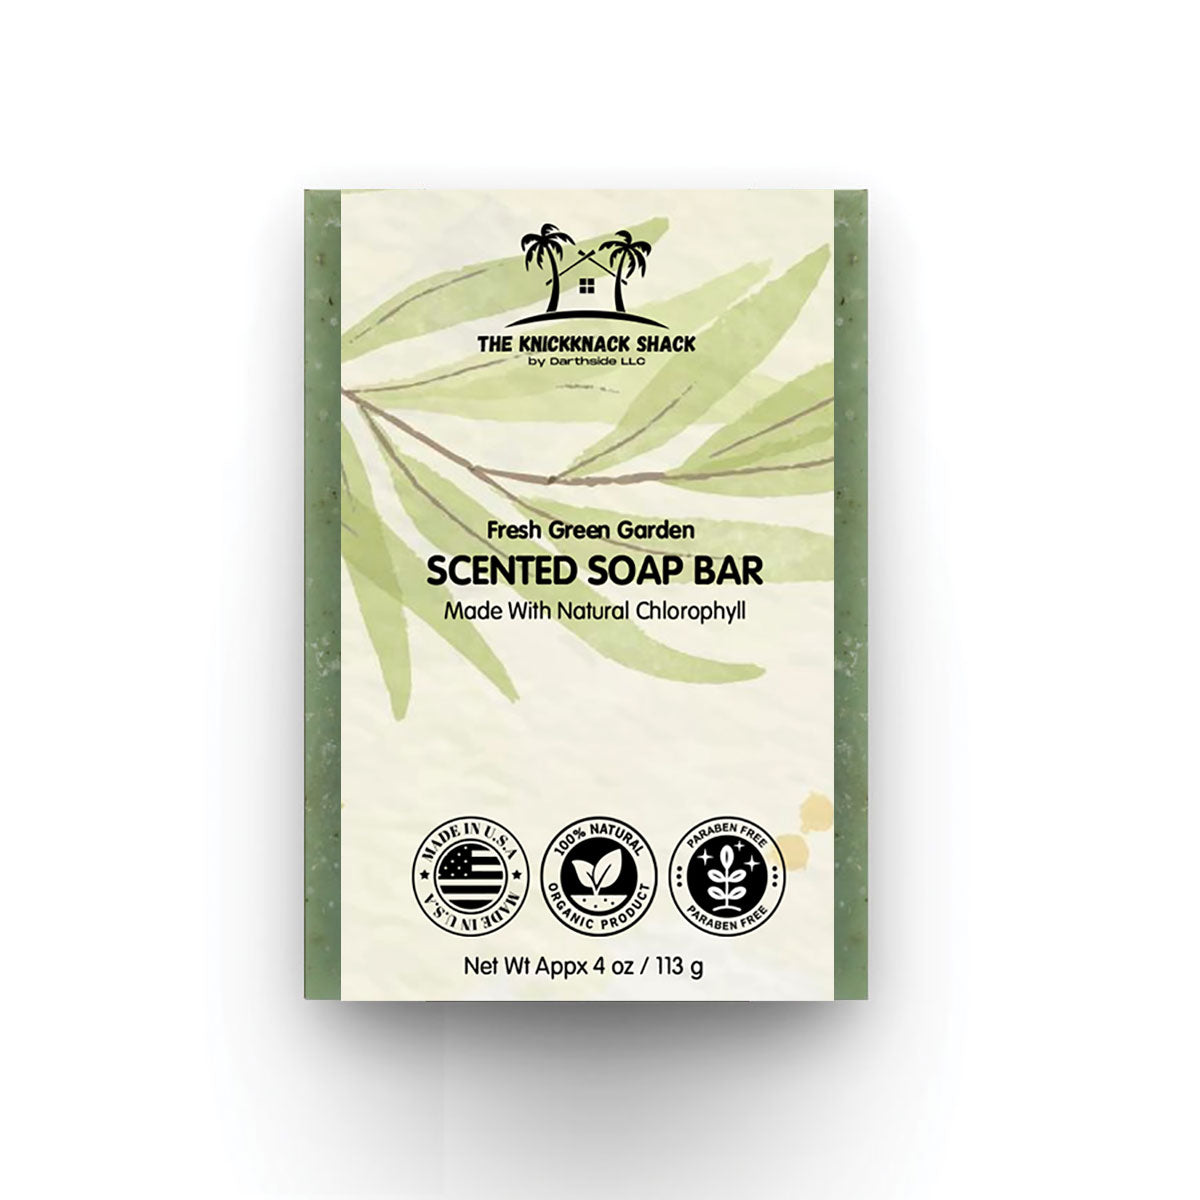 Fresh Green Garden Scented Soap Bar with Natural Chlorophyll